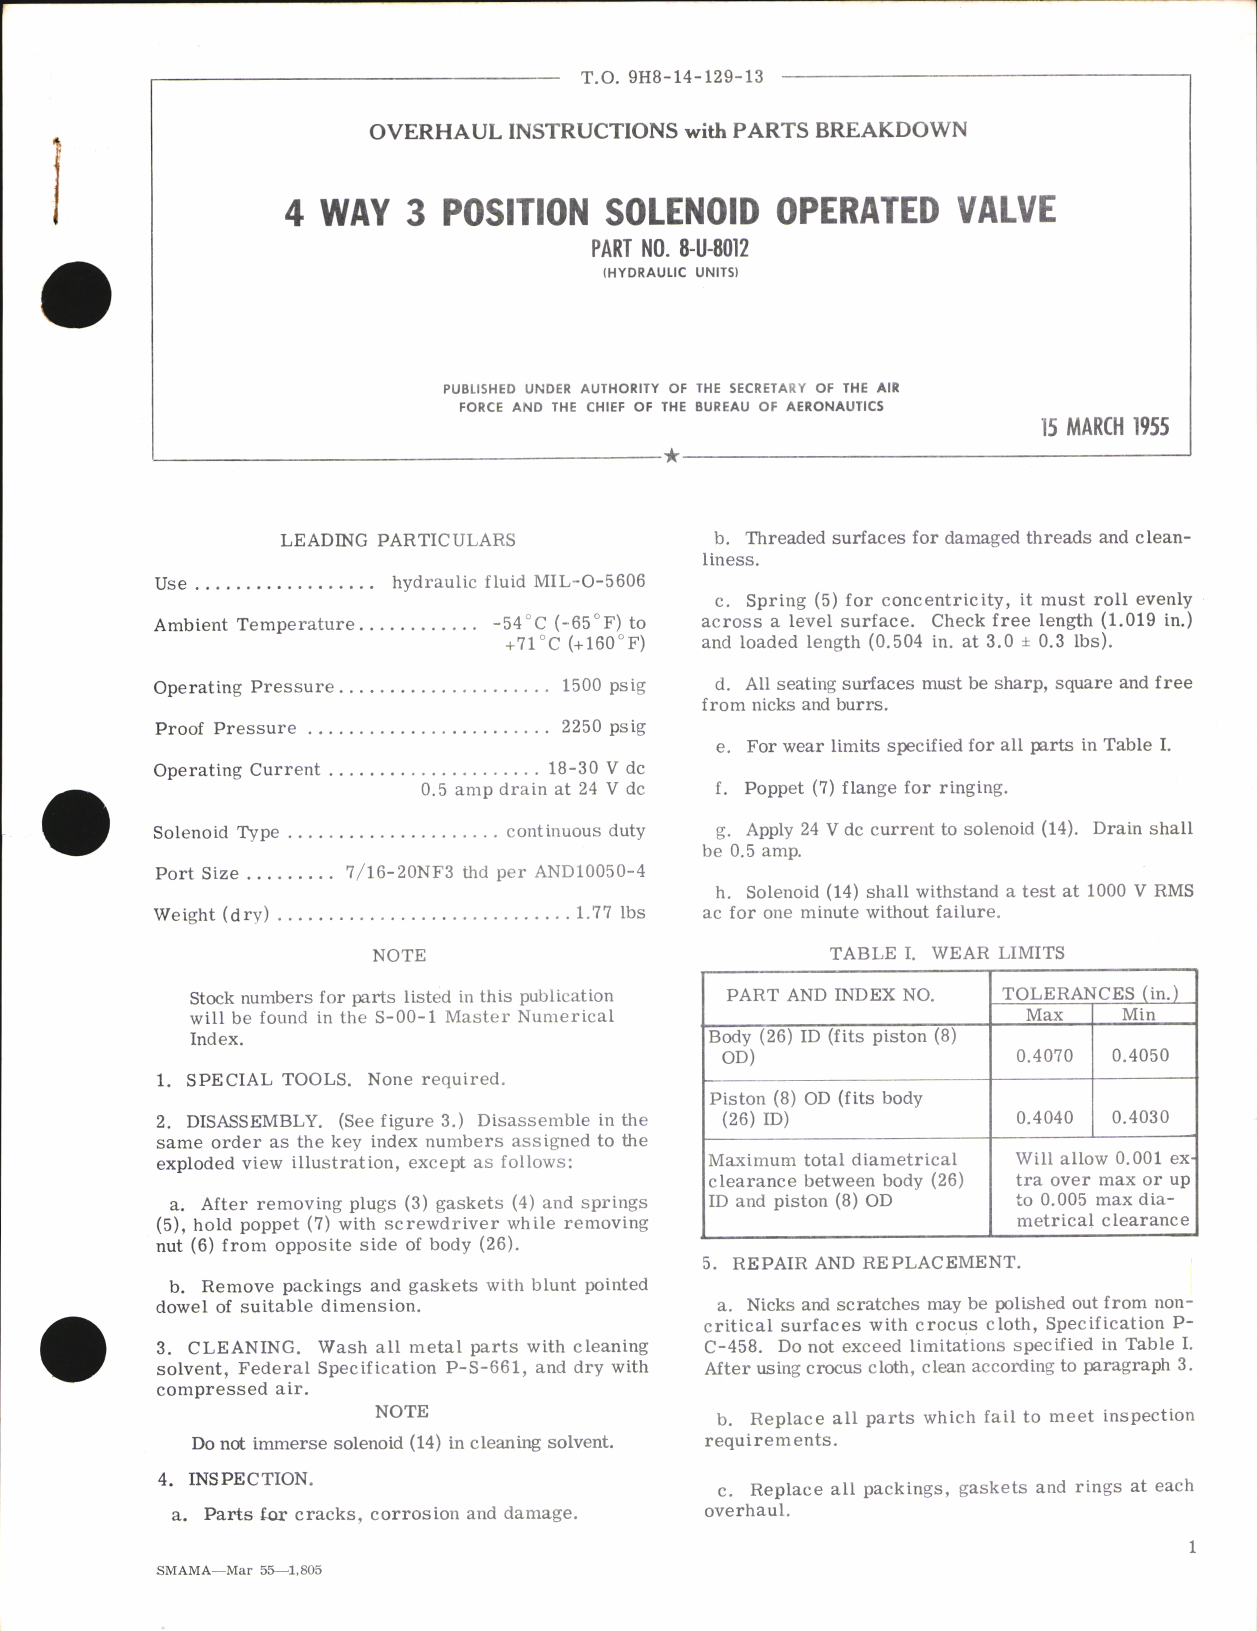 Sample page 1 from AirCorps Library document: Overhaul Instructions with Parts Breakdown for 4 way 3 Position Solenoid Operated Valve Part No. 8-U-8012